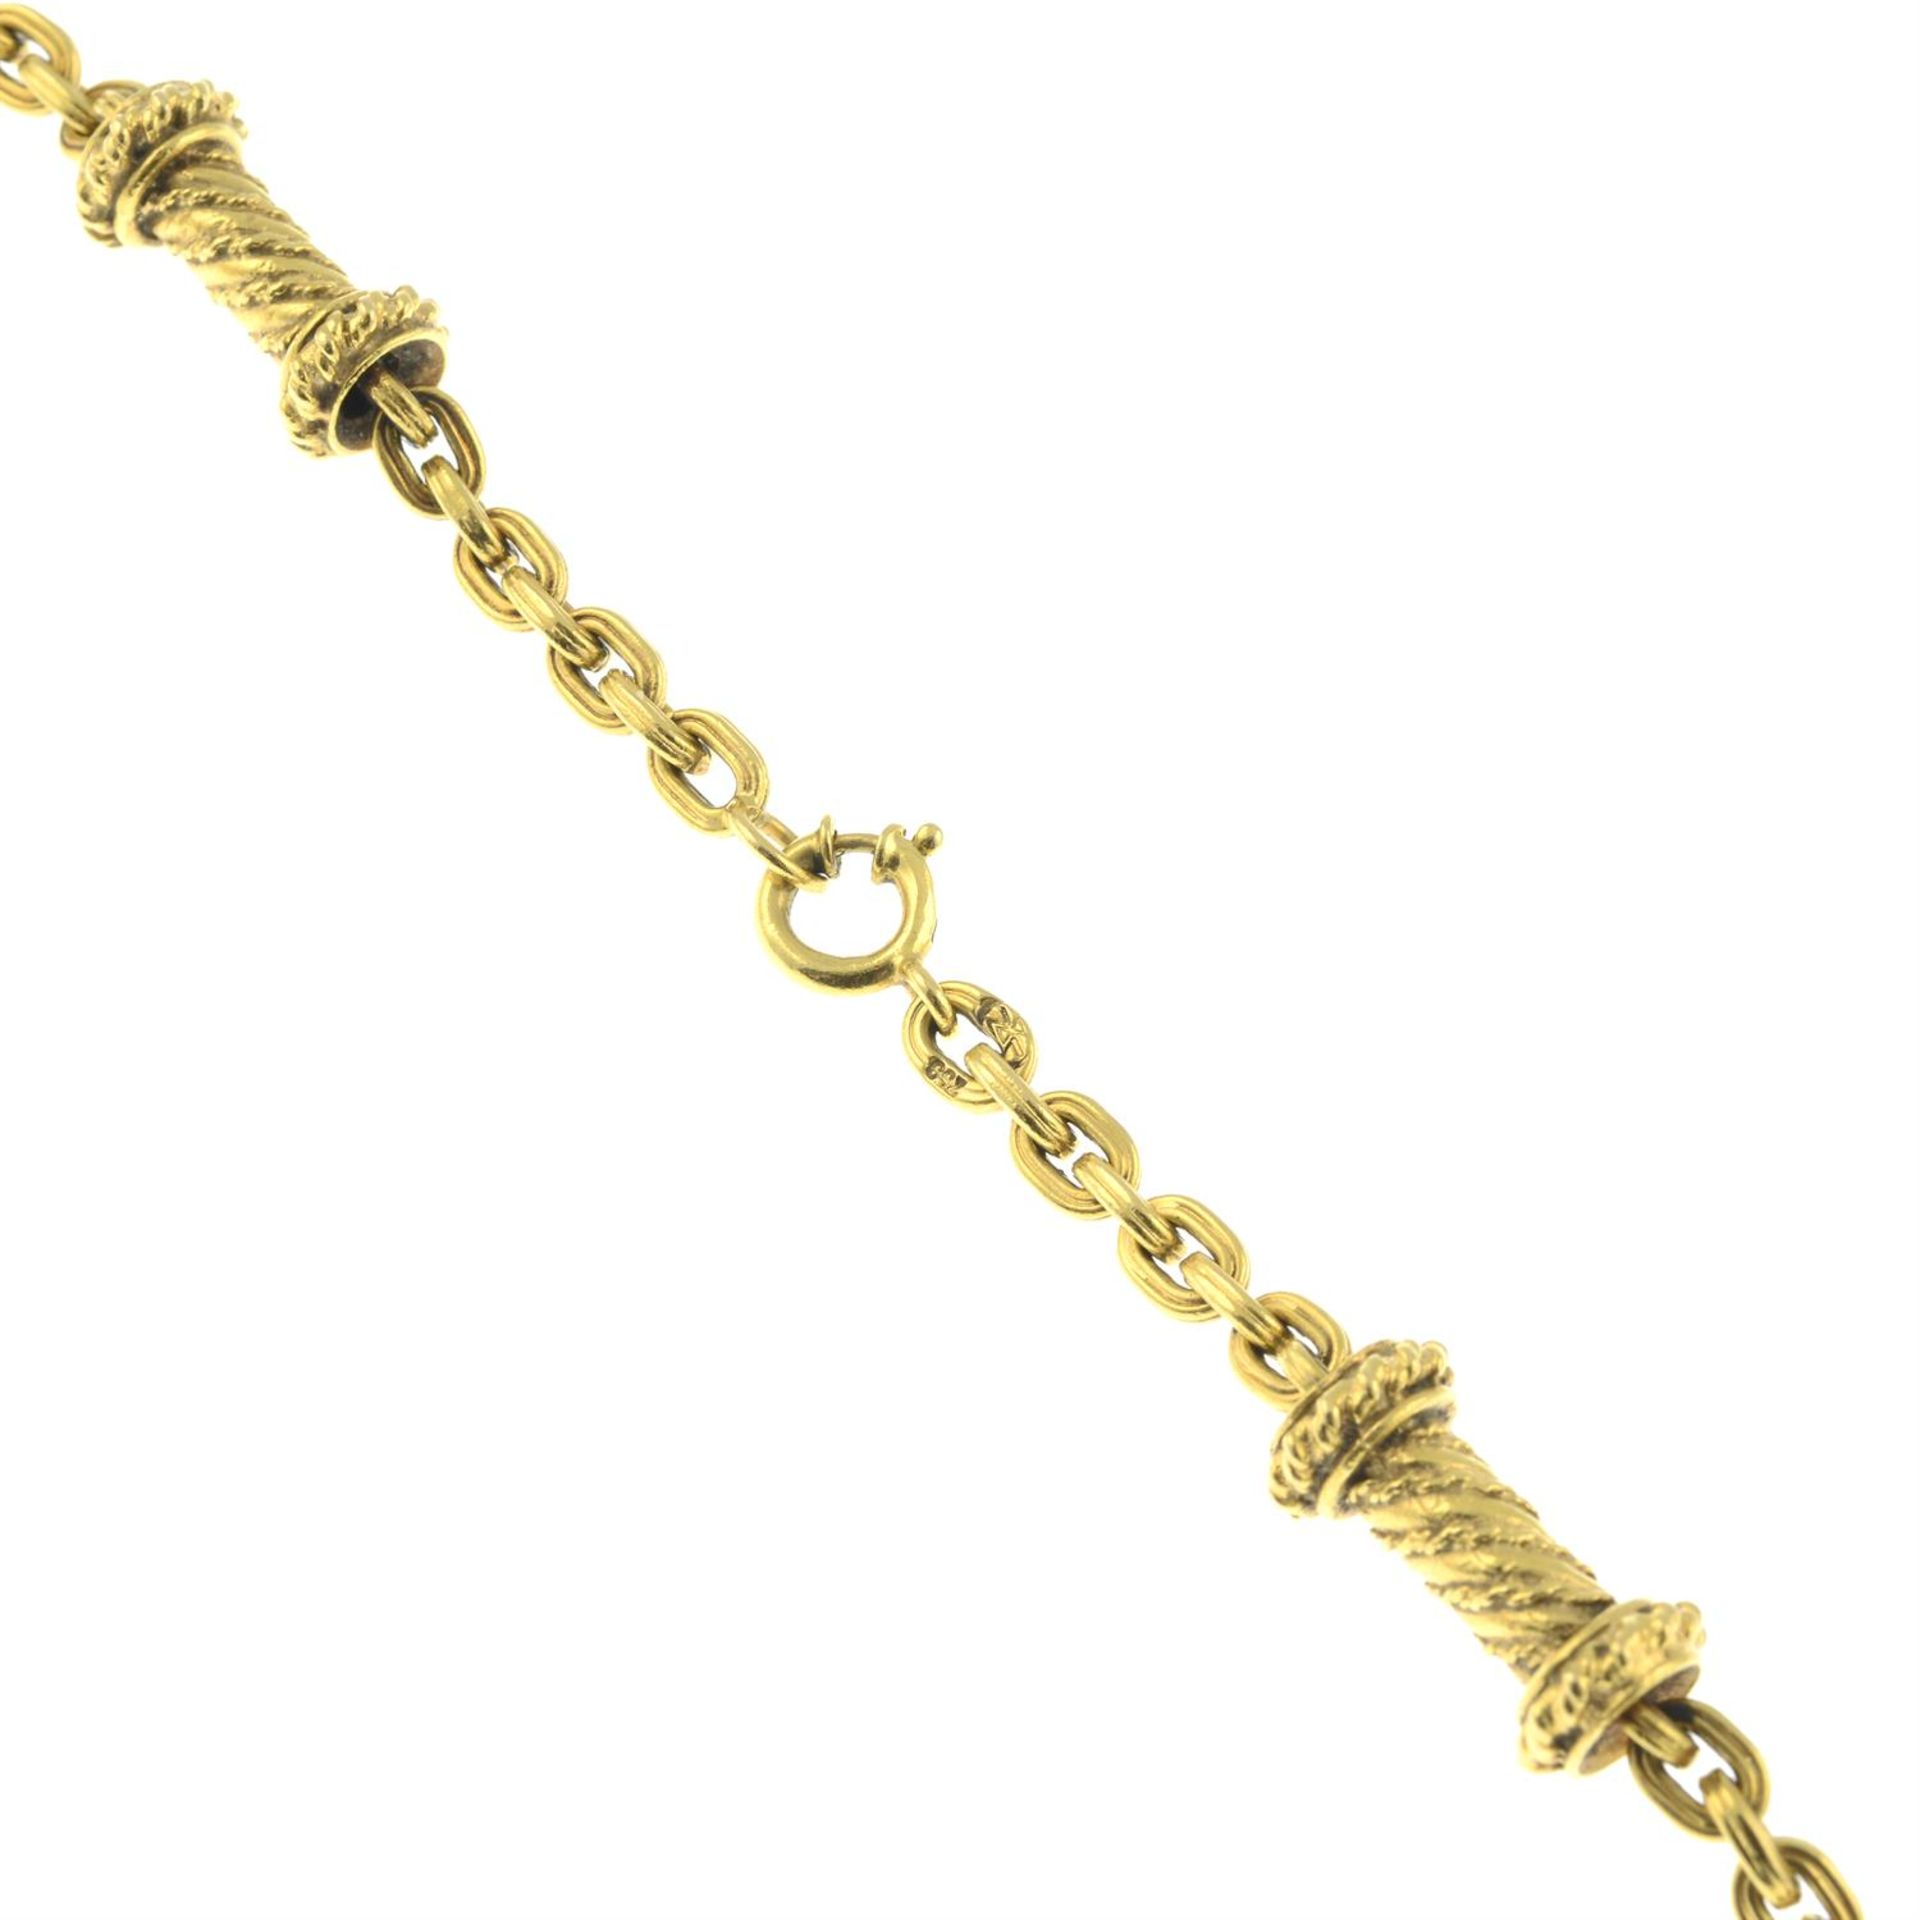 A reeded trace-link chain with rope-twist barrel, spacers. - Image 3 of 5